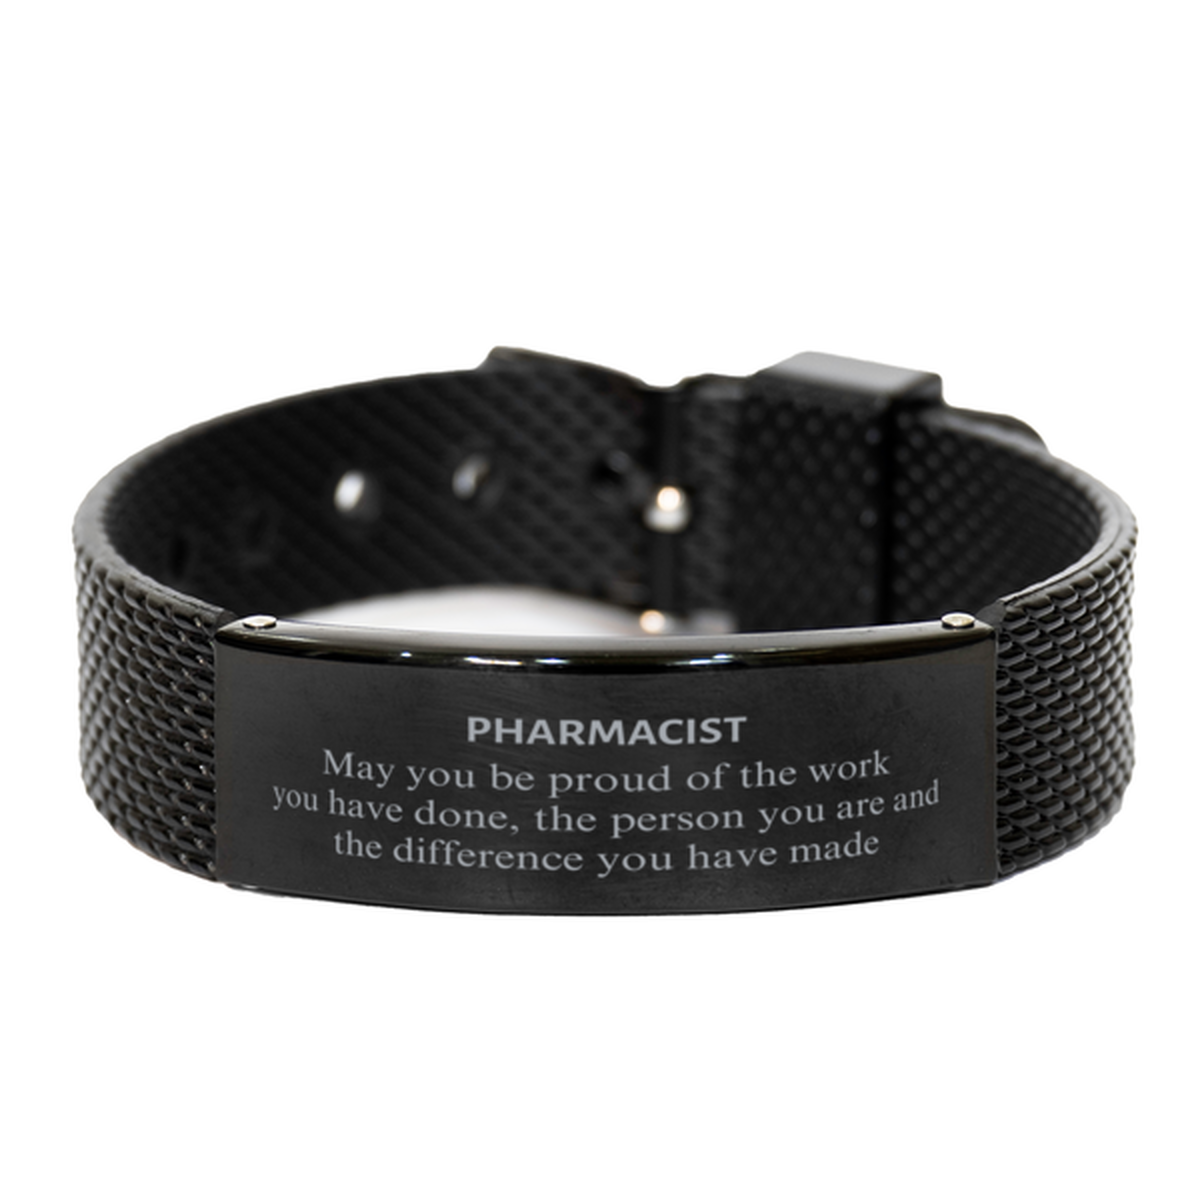 Pharmacist May you be proud of the work you have done, Retirement Pharmacist Black Shark Mesh Bracelet for Colleague Appreciation Gifts Amazing for Pharmacist